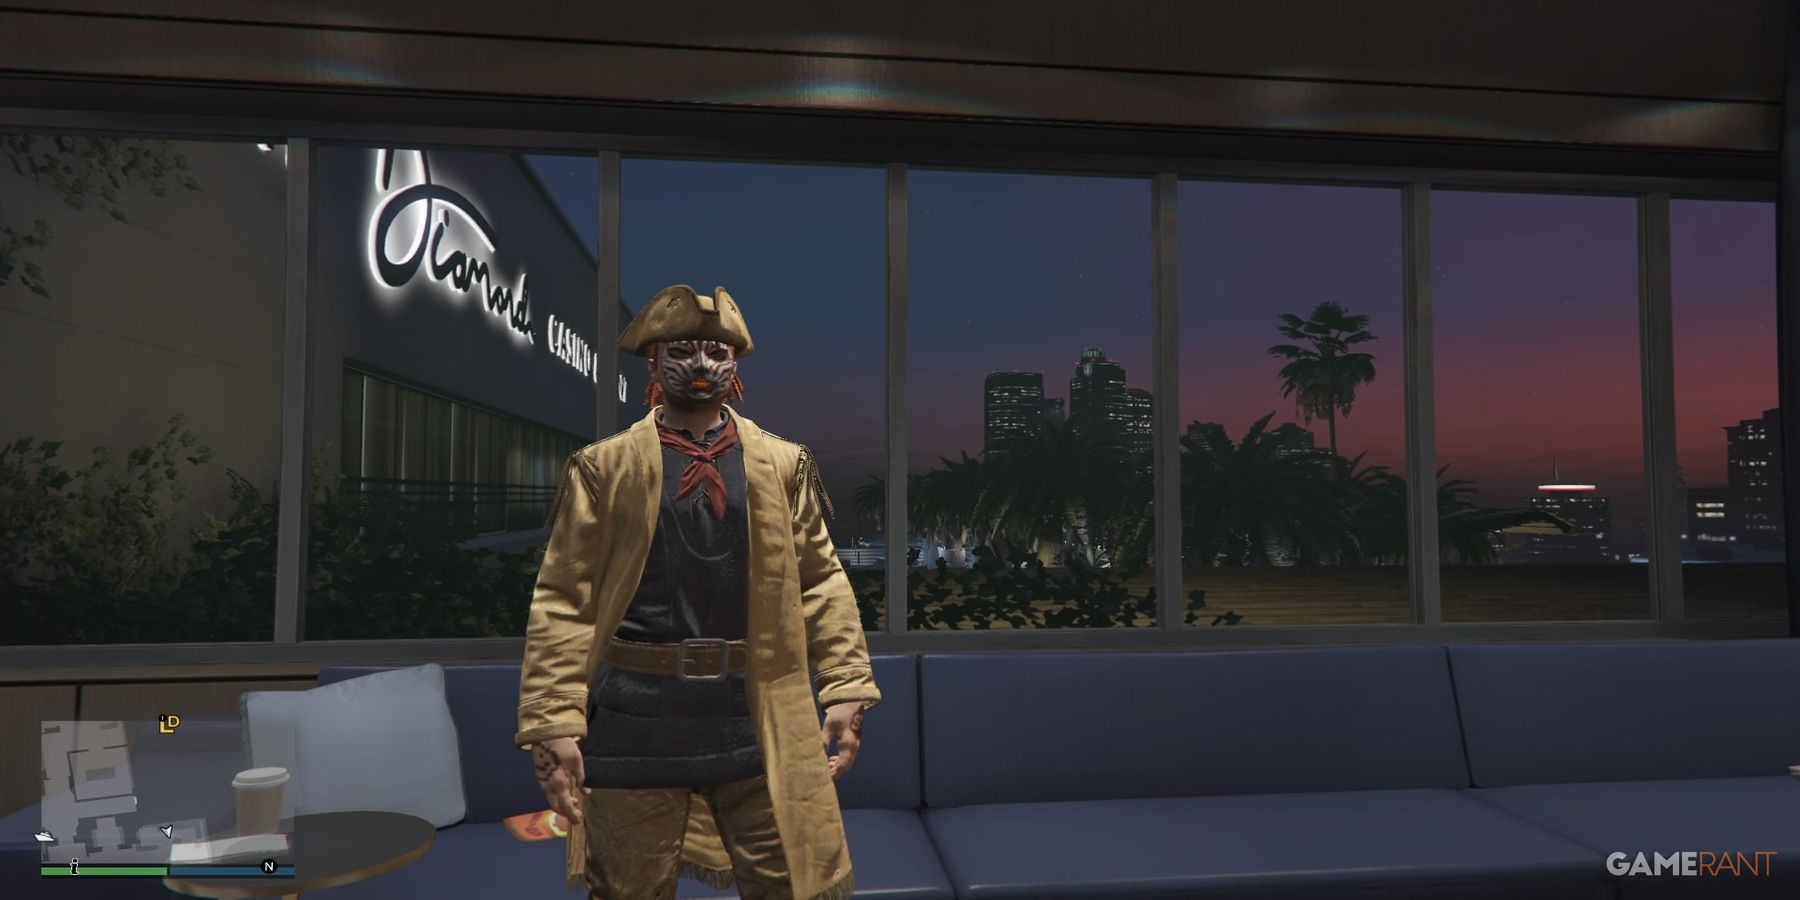 Pirate Outfit in GTA 5 Online